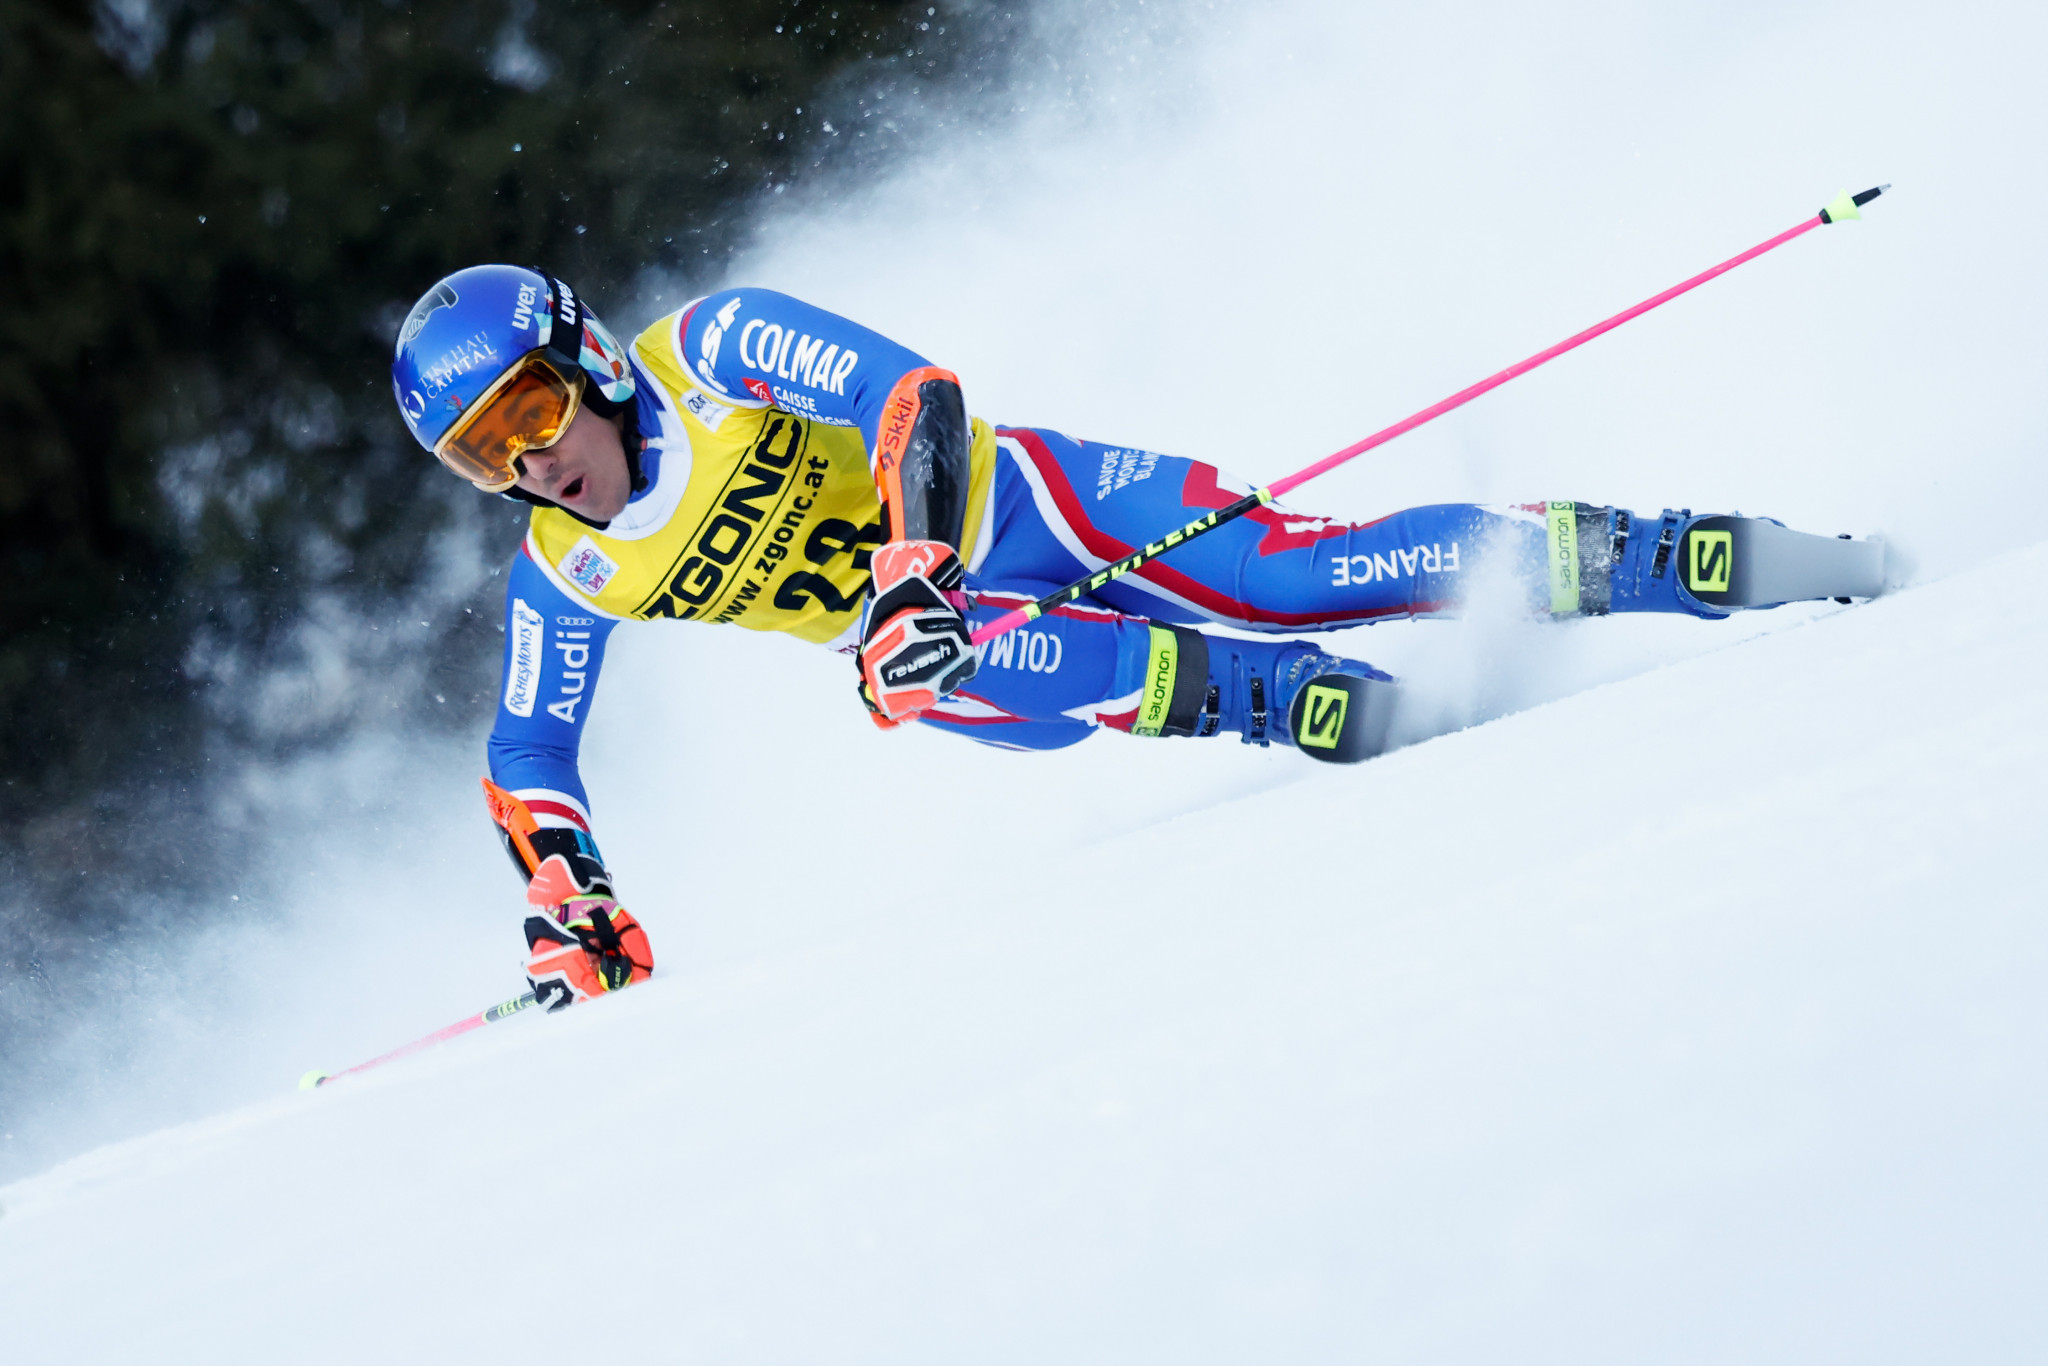 France's Victor Muffat-Jeandet suffered a broken ankle at the Alpine Ski World Cup in Zagreb ©Getty Images